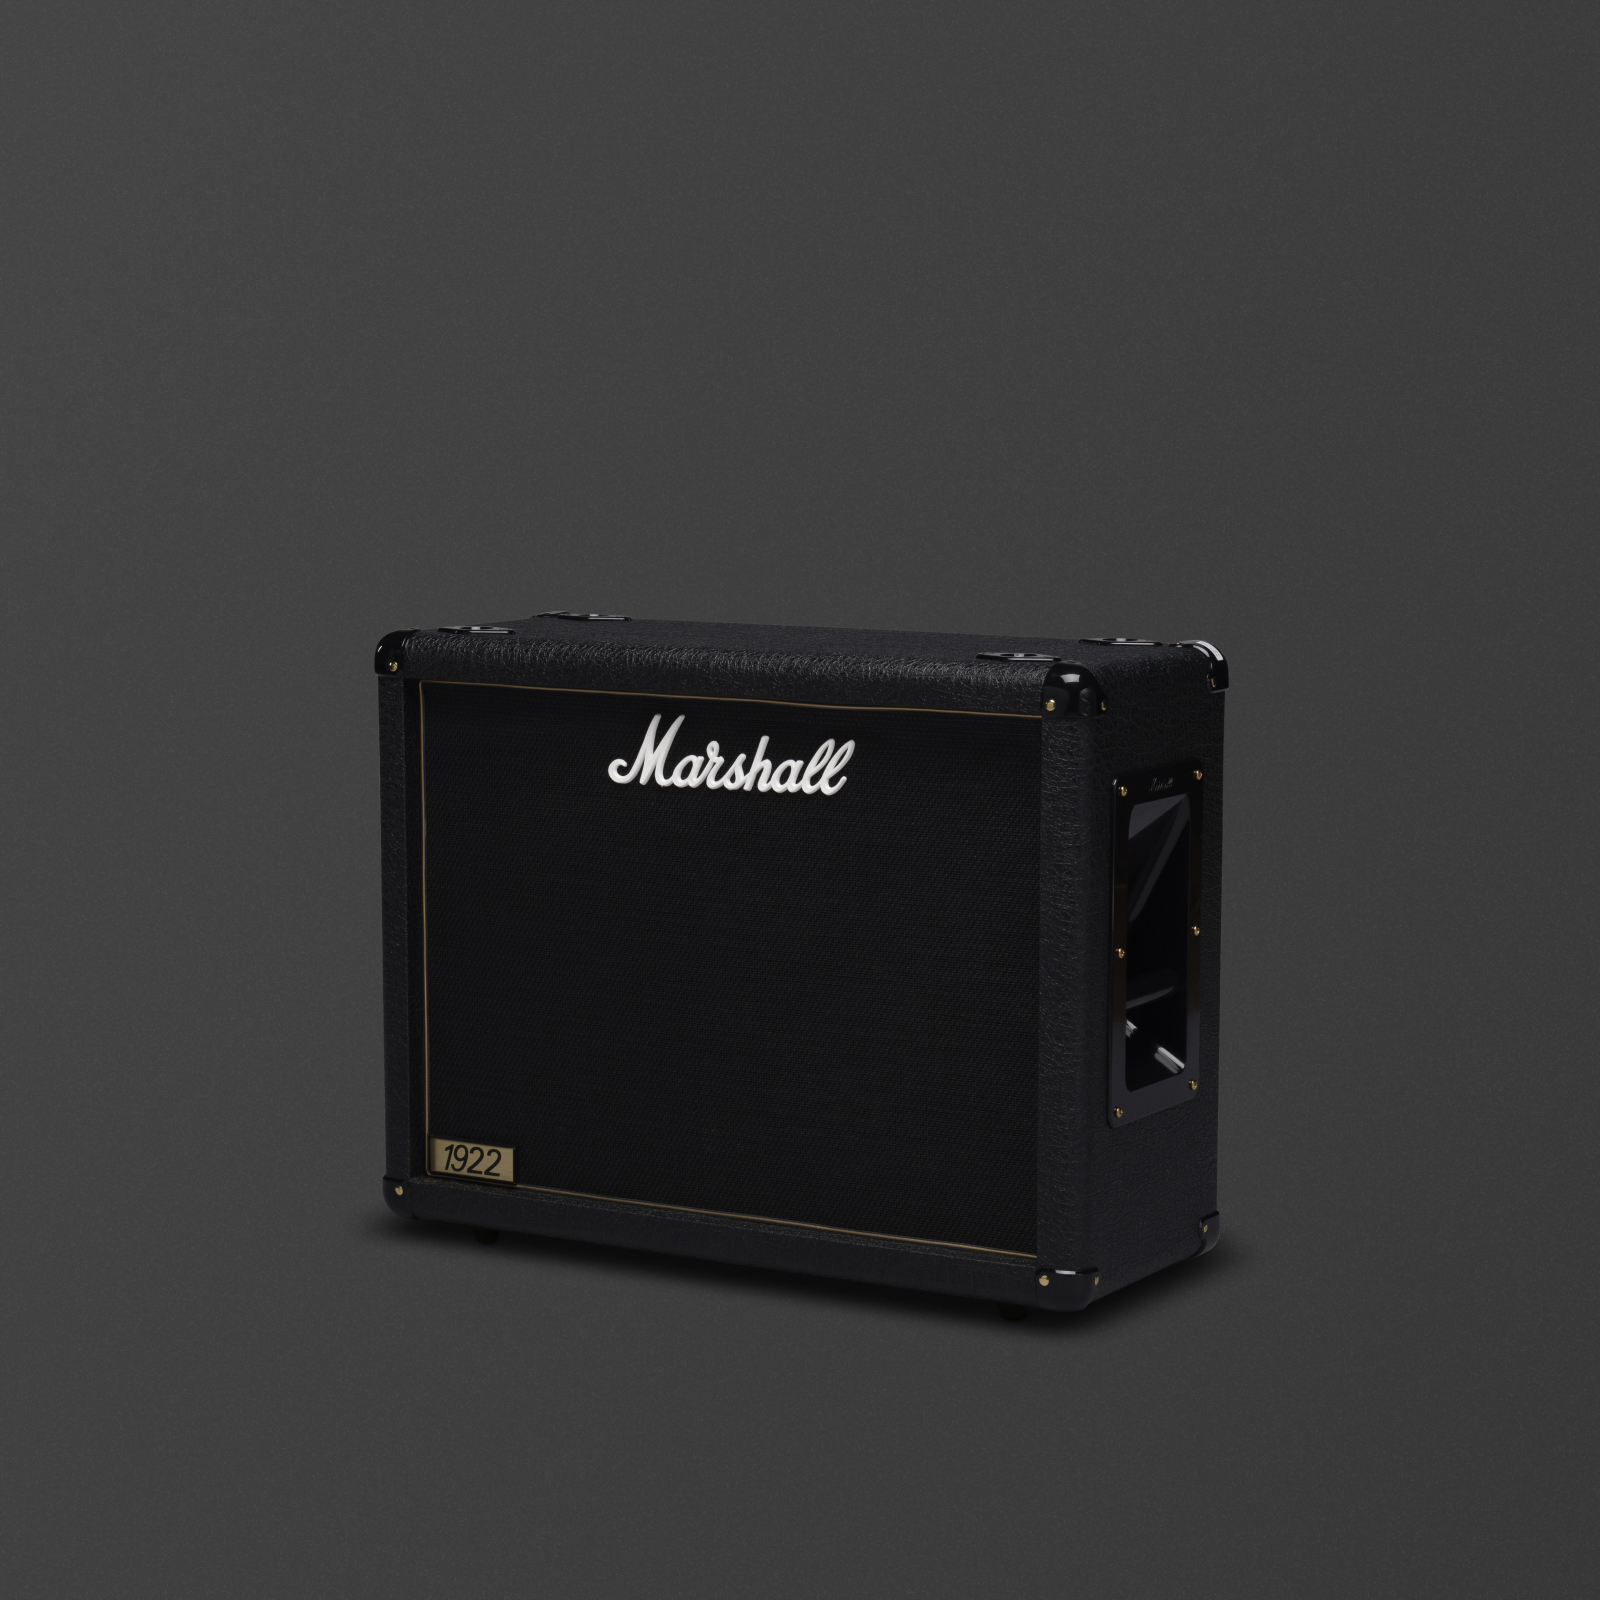 2x12" black transportable extension box for combos